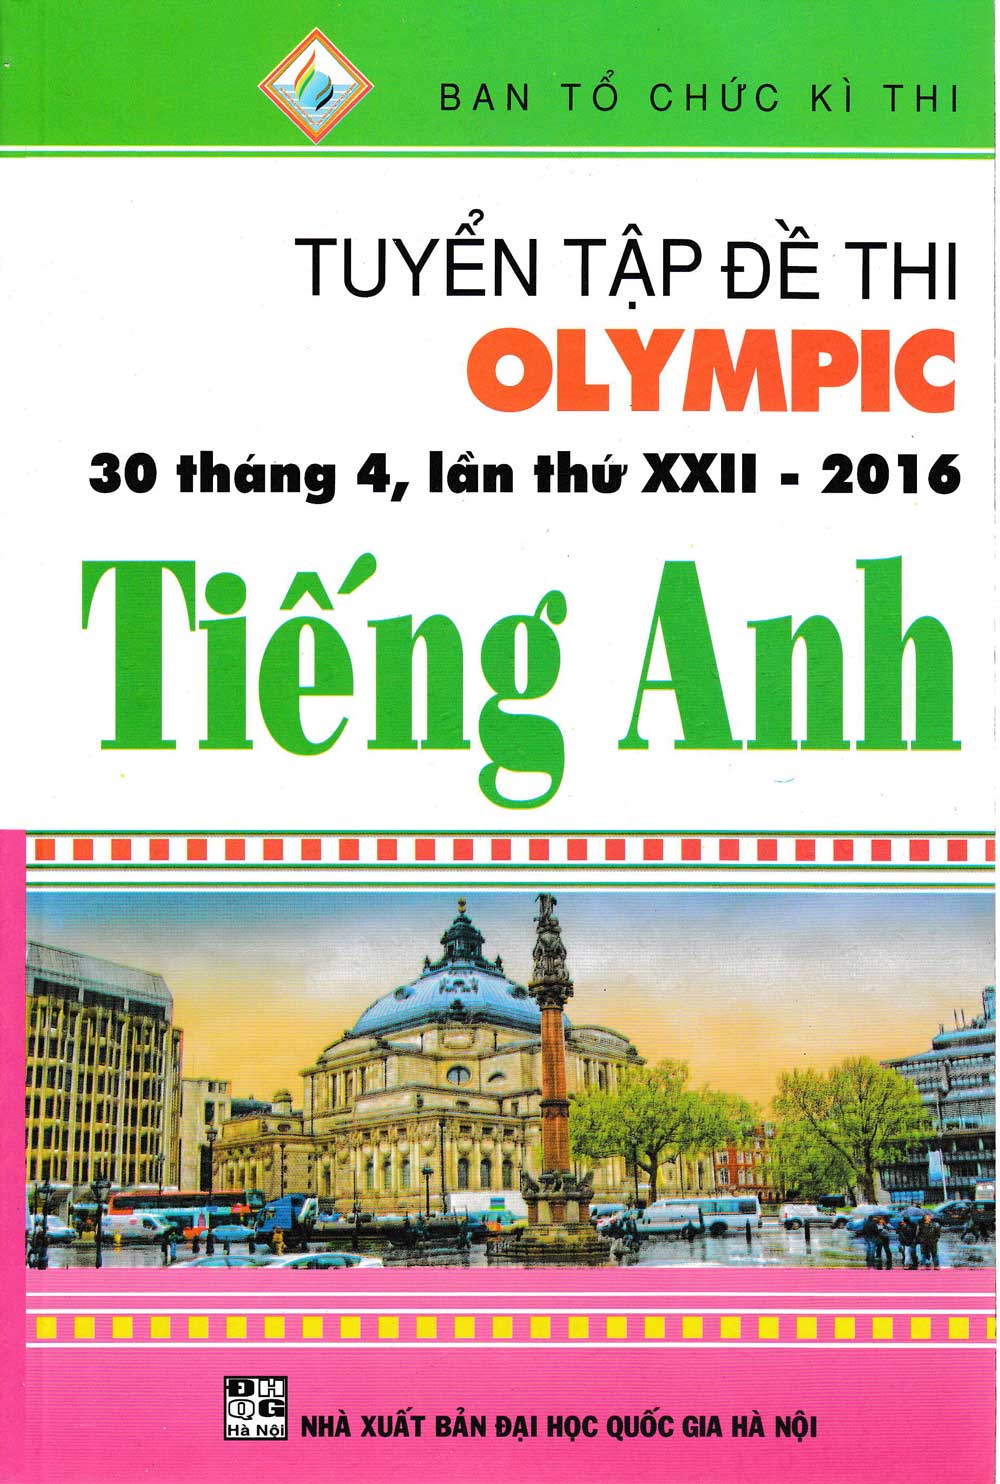 olympic-tieng-anh-1.jpg